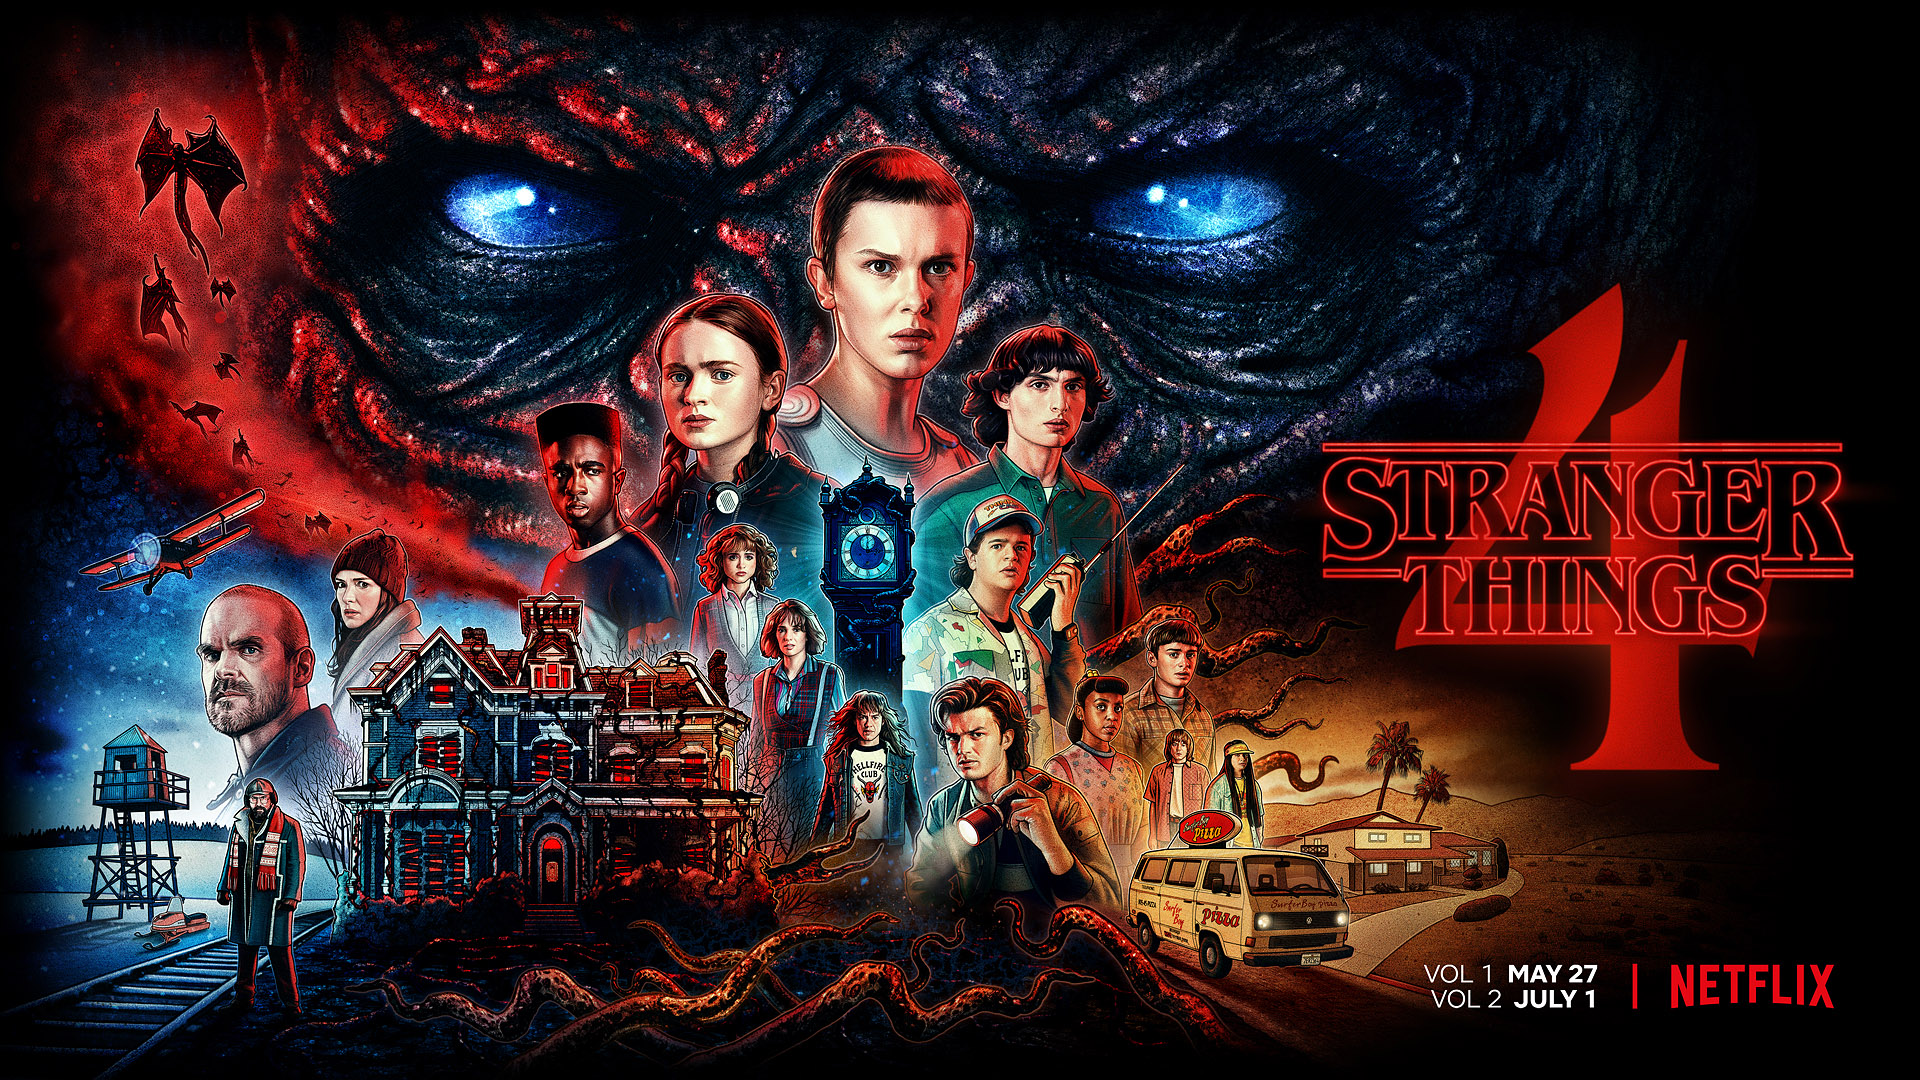 Stranger Things S2  Will sees the Shadow monster 4K wallpaper download